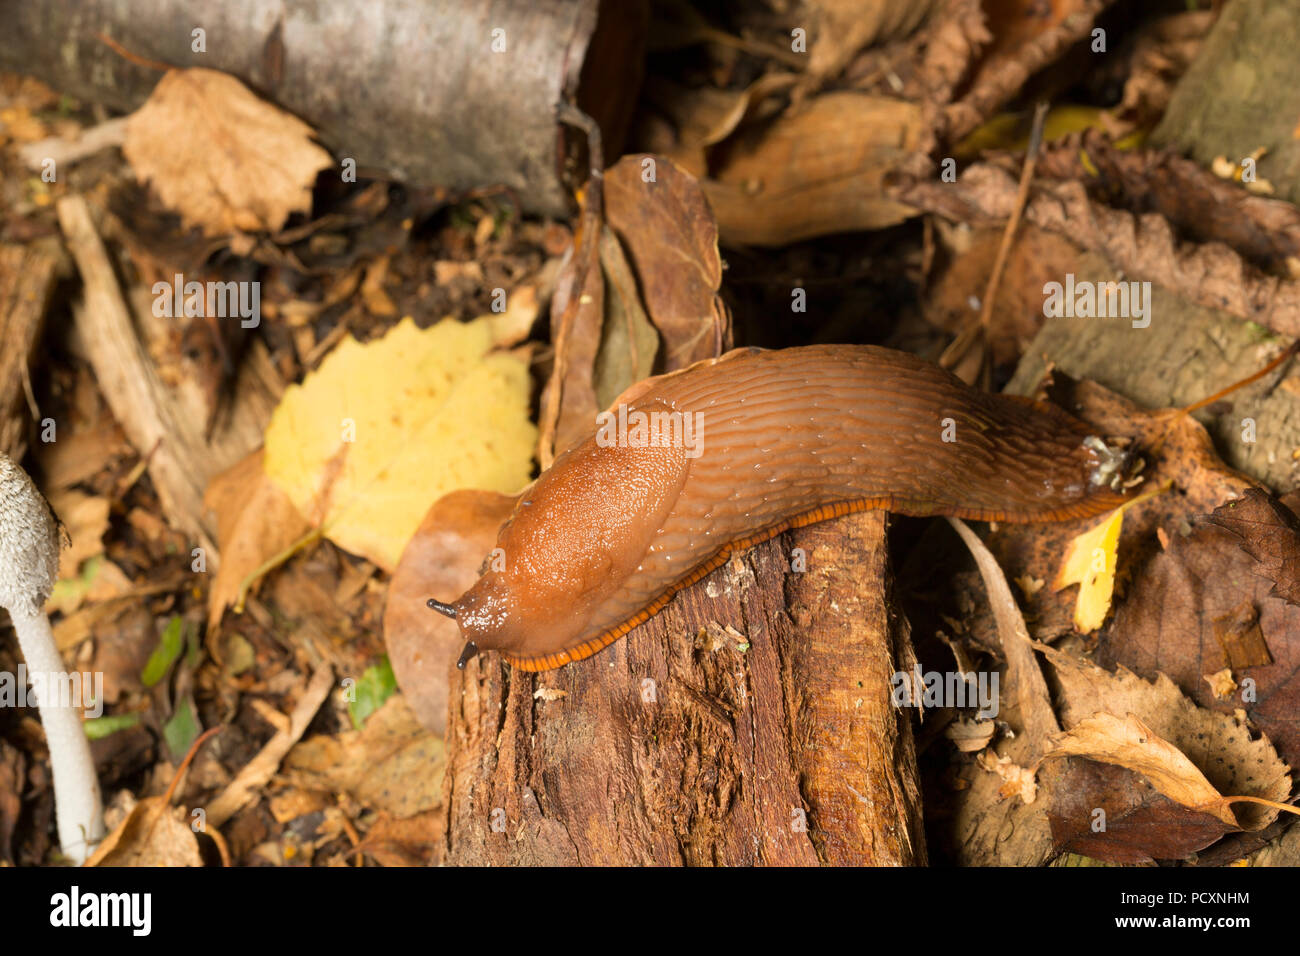 A Large Red Slug, Arion ater, crawling at night on the edge of a woodpile near fungi during the UK 2018 hot weather in a garden in Lancashire England  Stock Photo